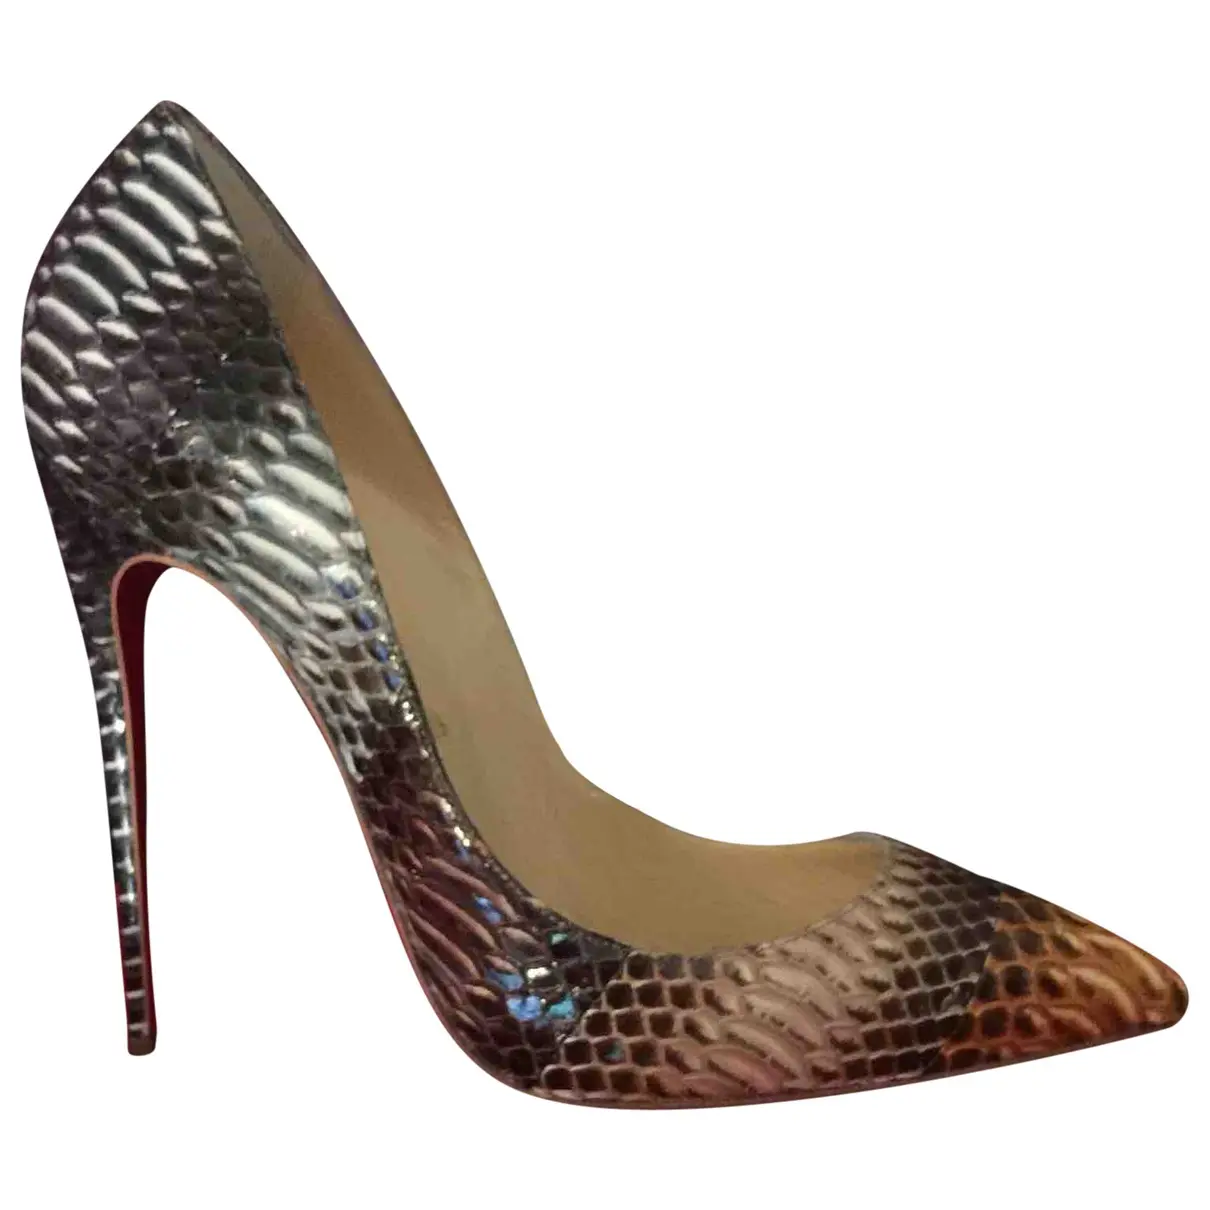 Pigalle pumps in python Christian Louboutin